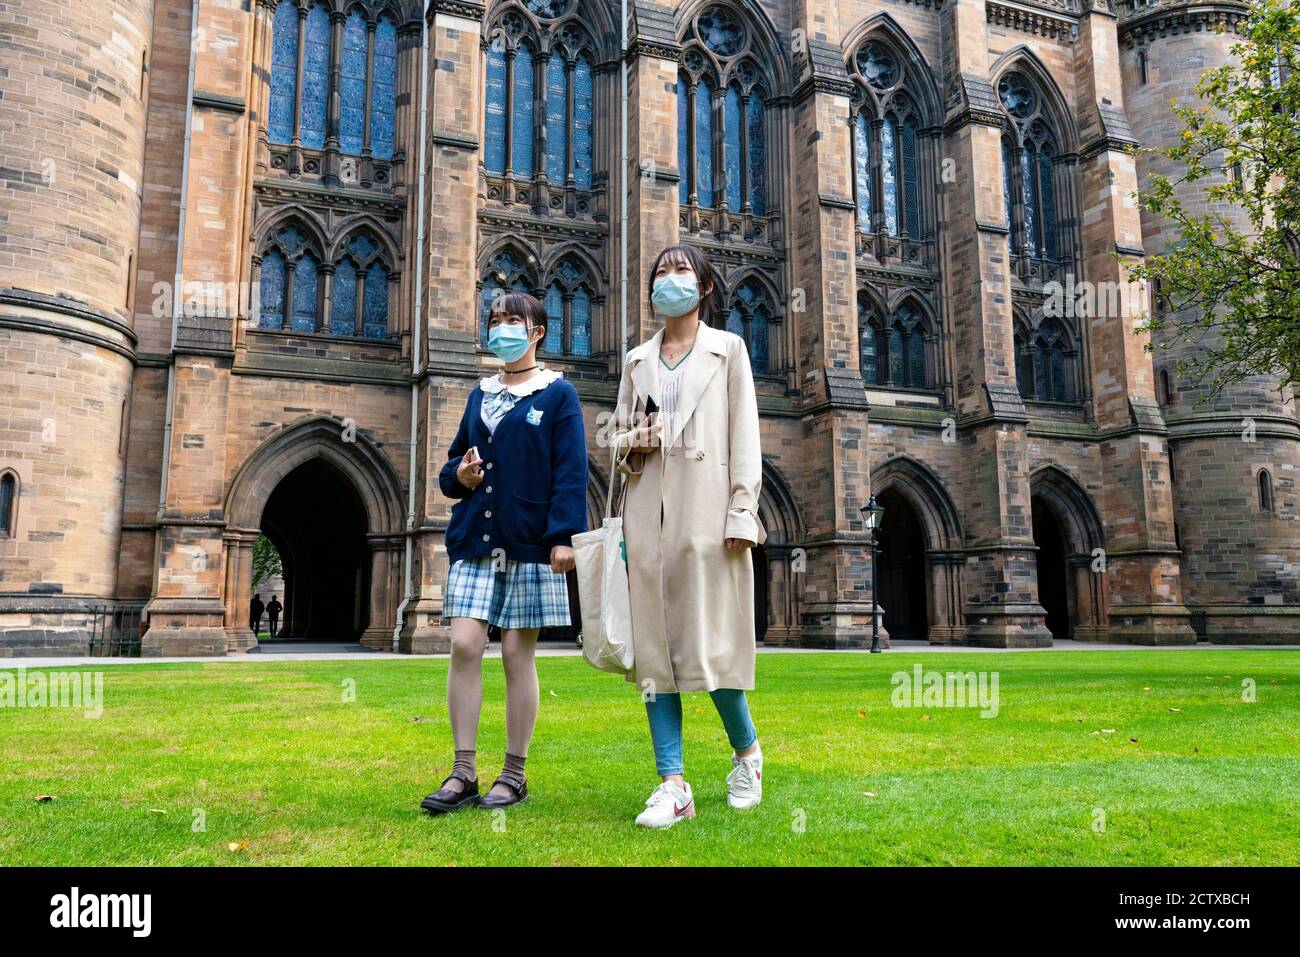 Glasgow, Scotland, UK. 25 September, 2020. Many students at Glasgow University have tested positive for the Covid-19 virus. The Scottish Government has controversially ordered students in several halls of residence where positive cases have spiked, to self-isolate indefinitely. Pictured; Chinese mother and young daughter visiting campus .  Iain Masterton/Alamy Live News Stock Photo